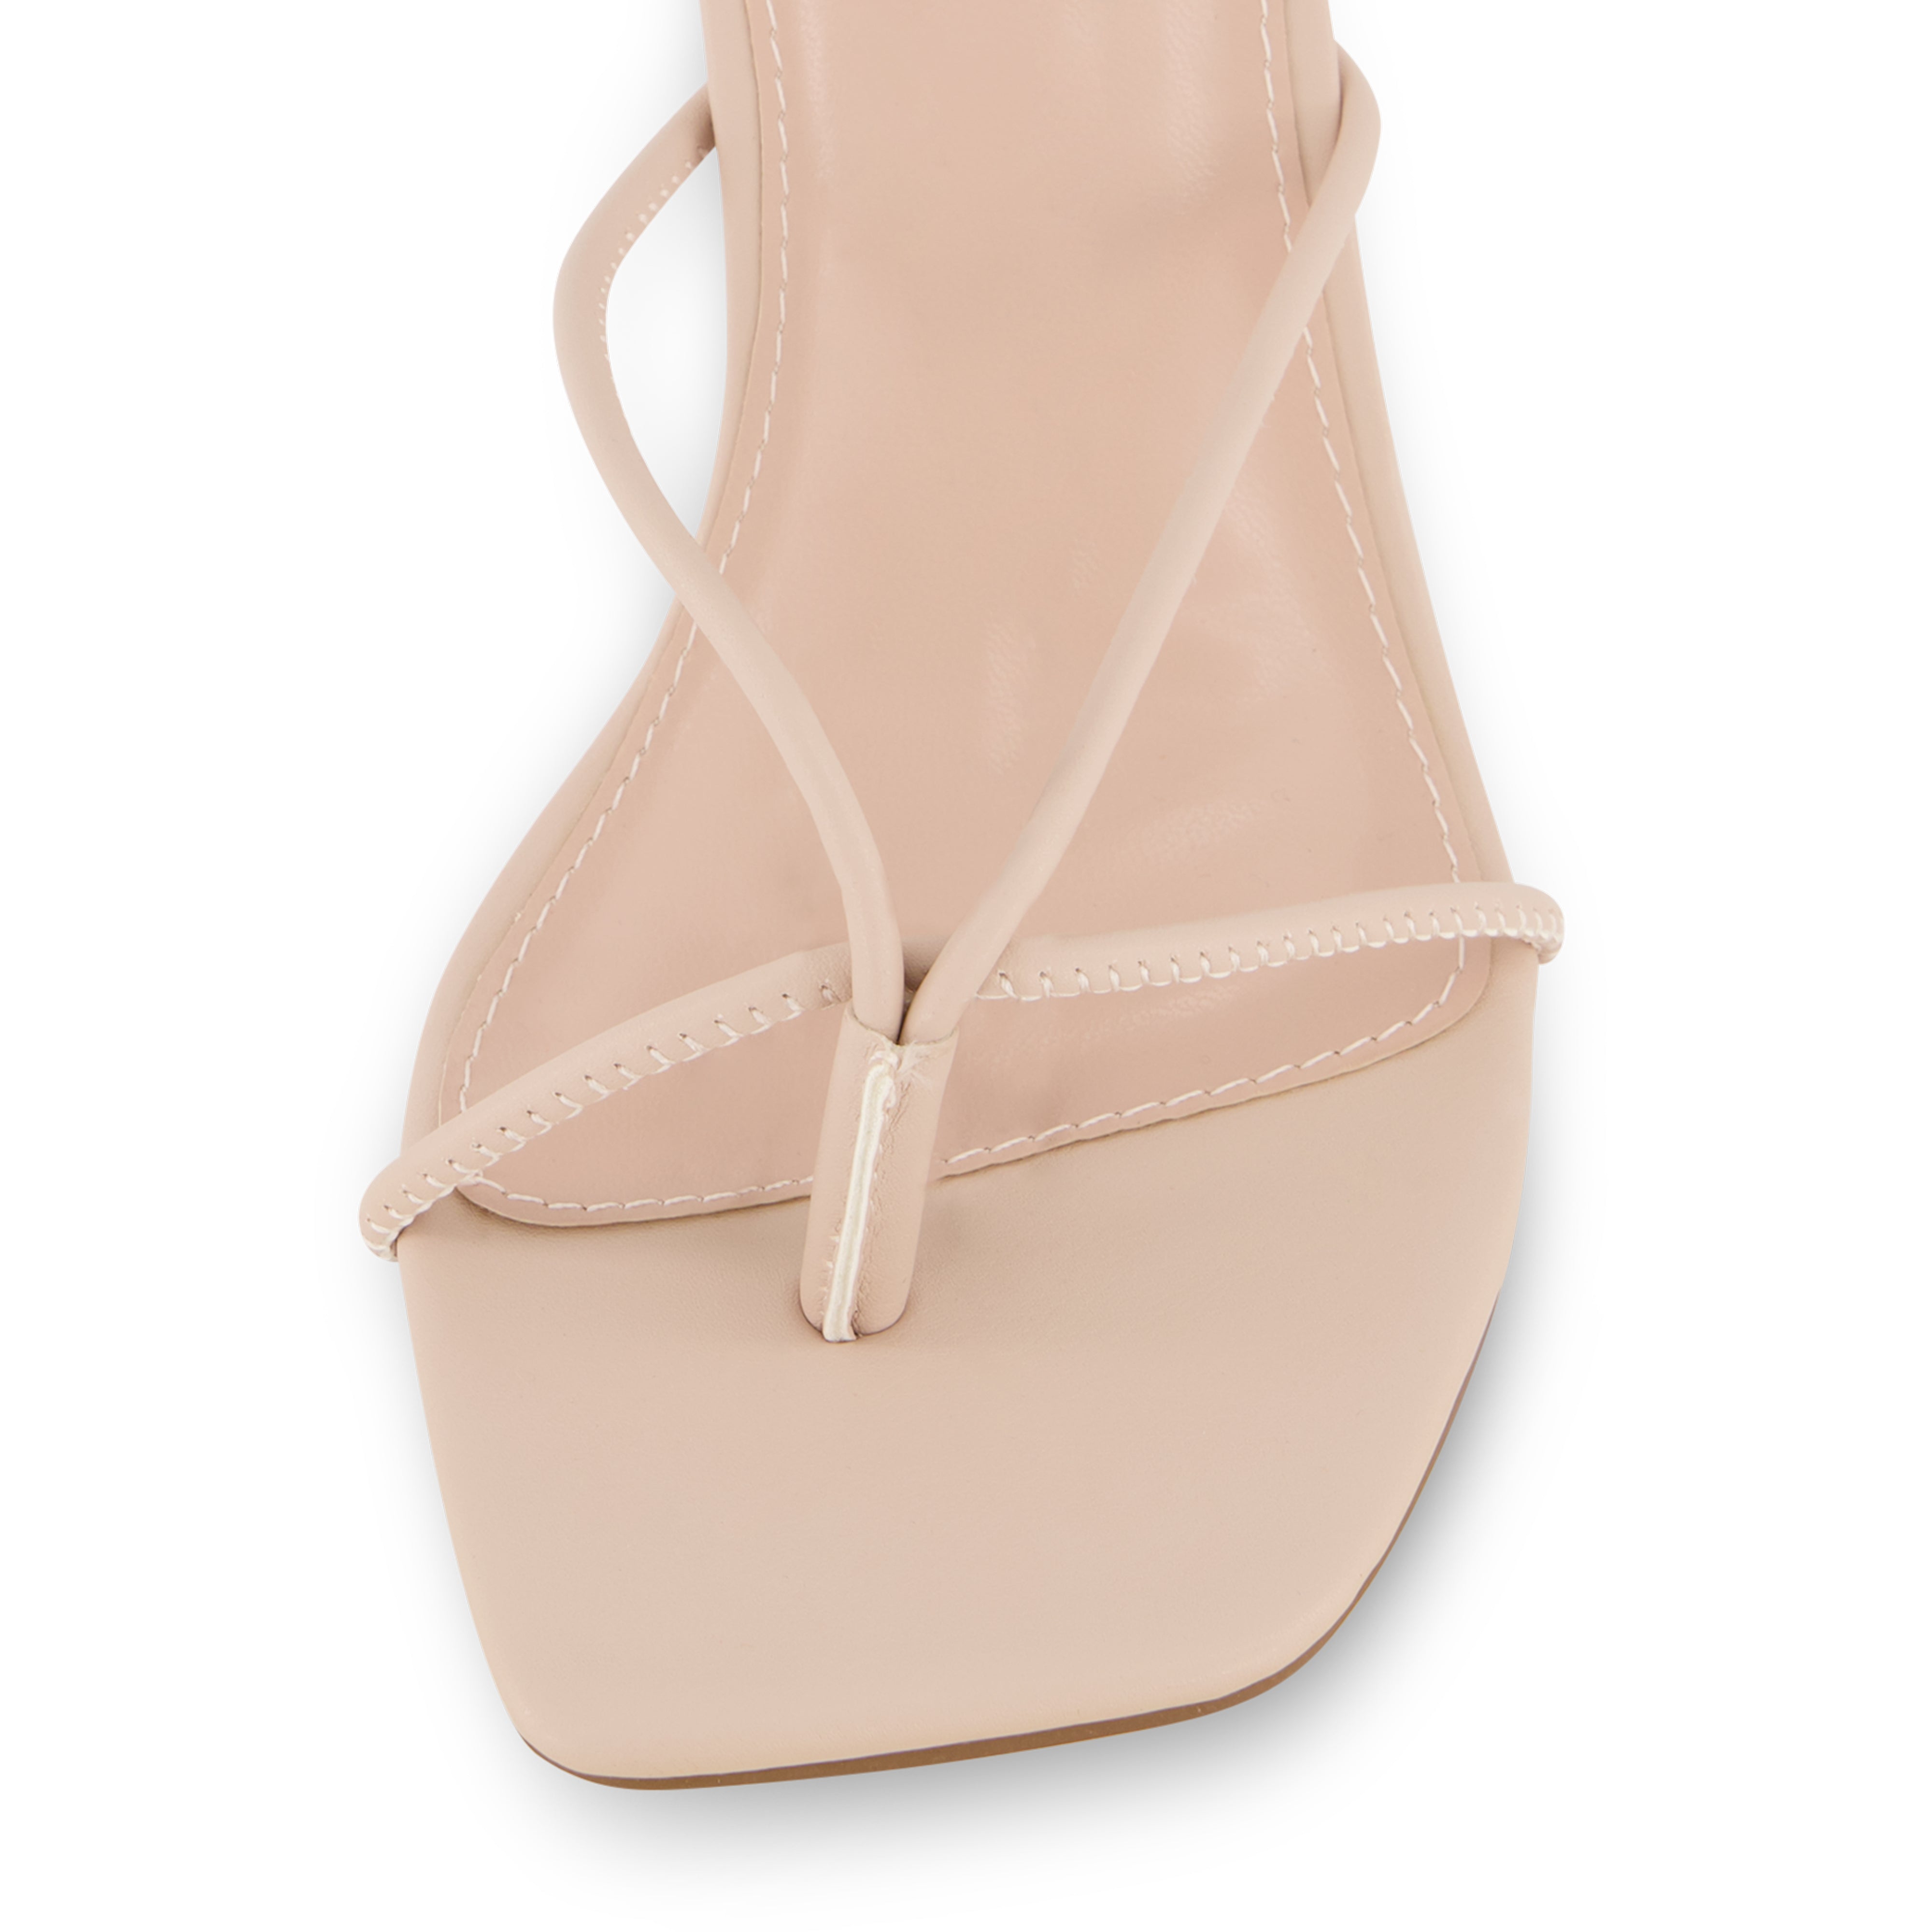 Belaire Strappy Dress Sandal